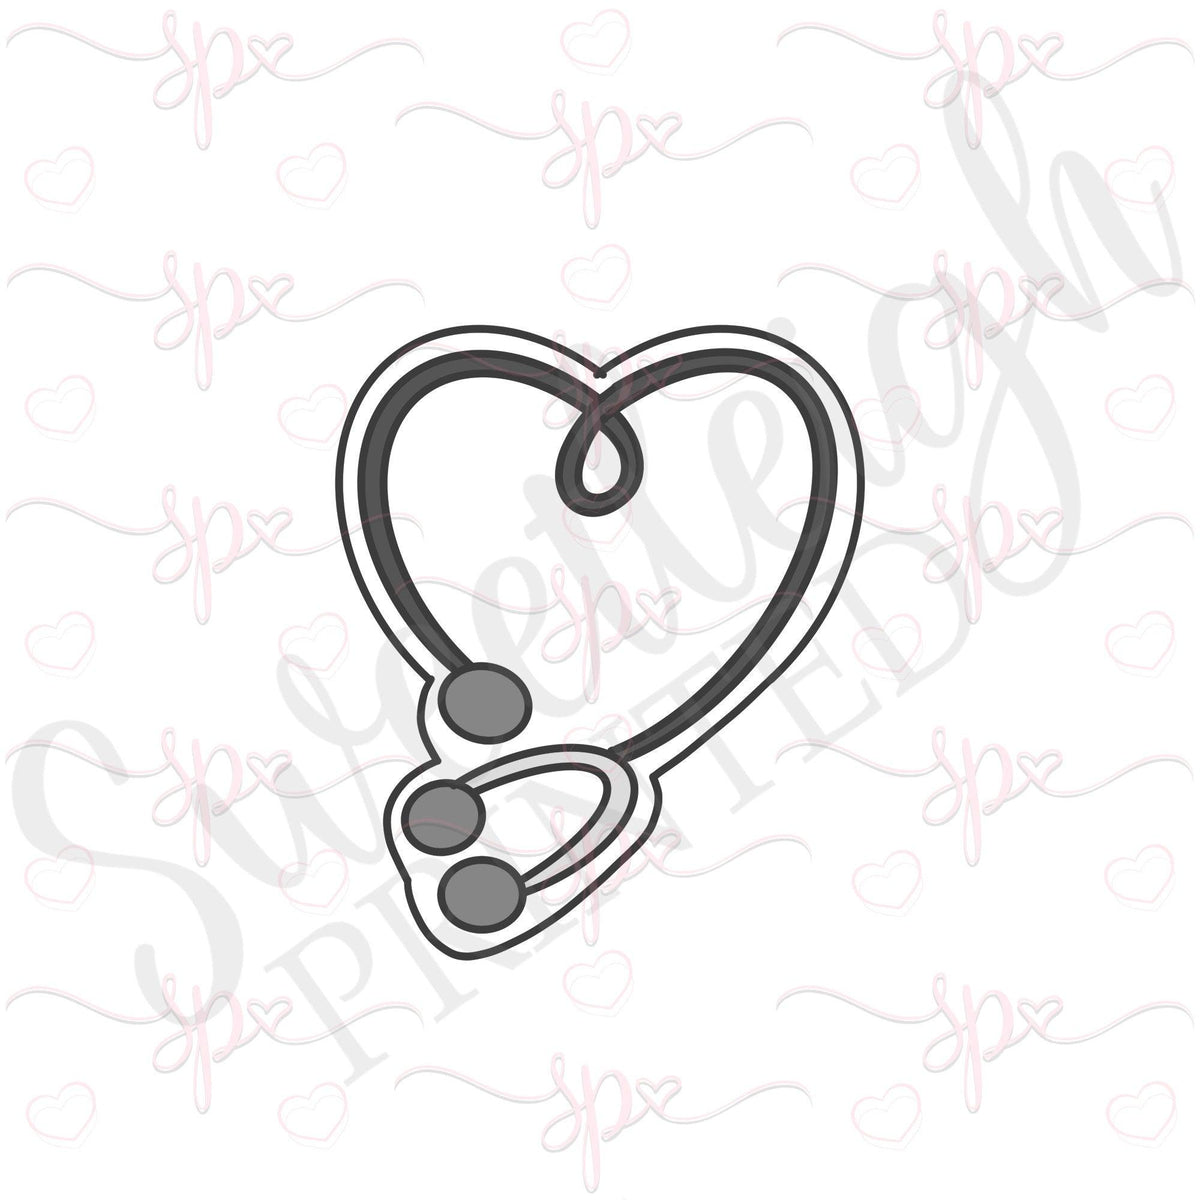 Heart Stethoscope Cookie Cutter - Sweetleigh 